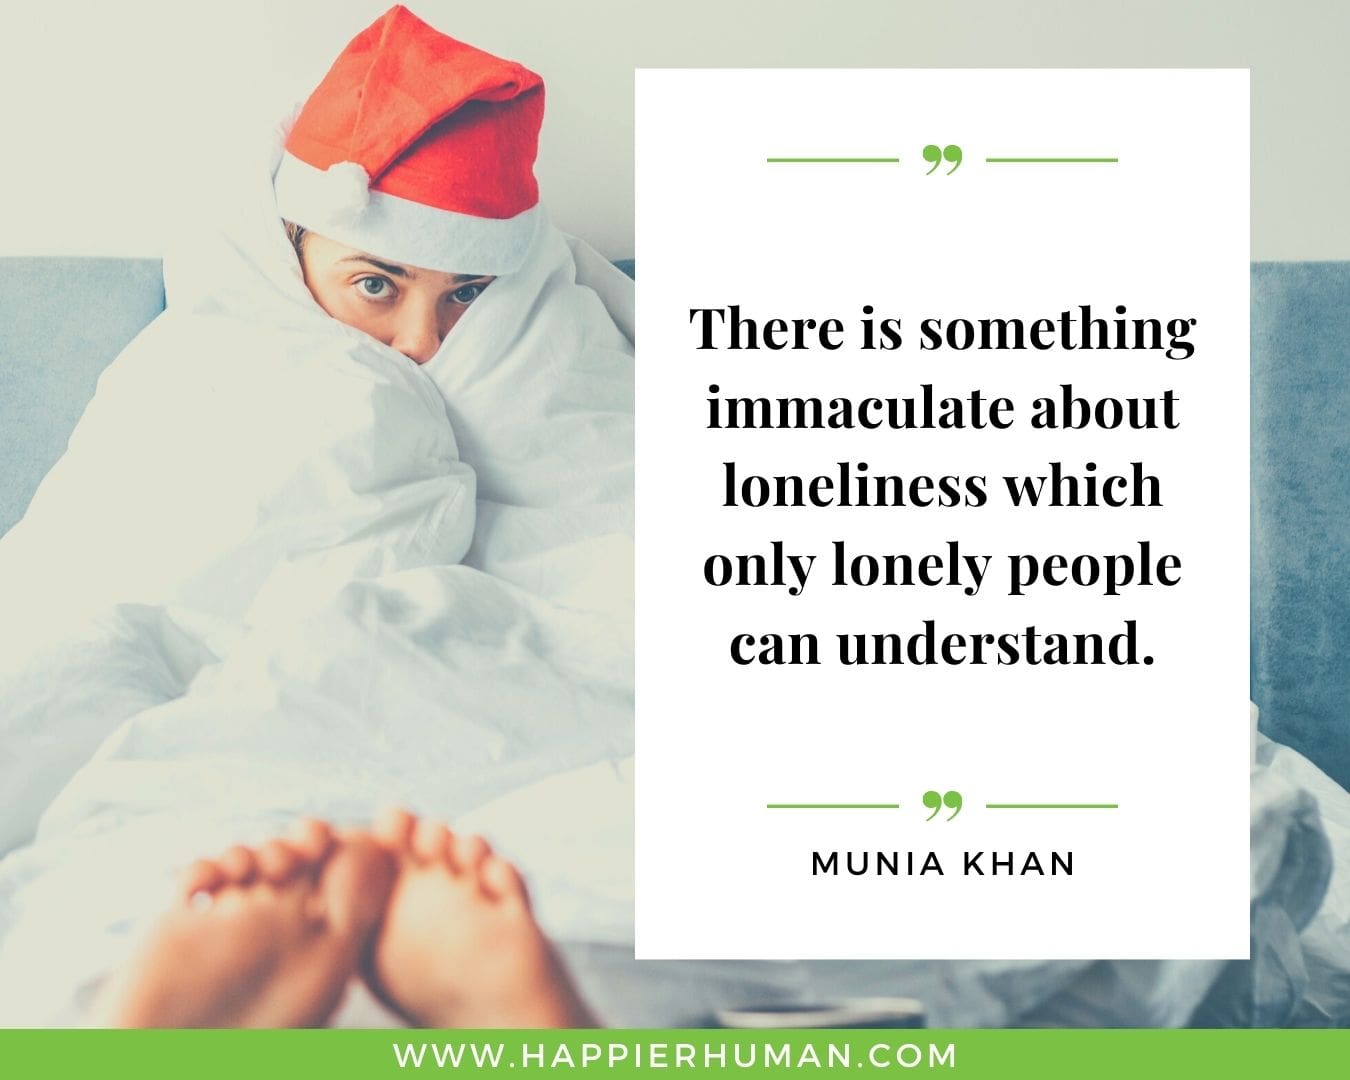 Loneliness Quotes - “There is something immaculate about loneliness which only lonely people can understand.”– Munia Khan